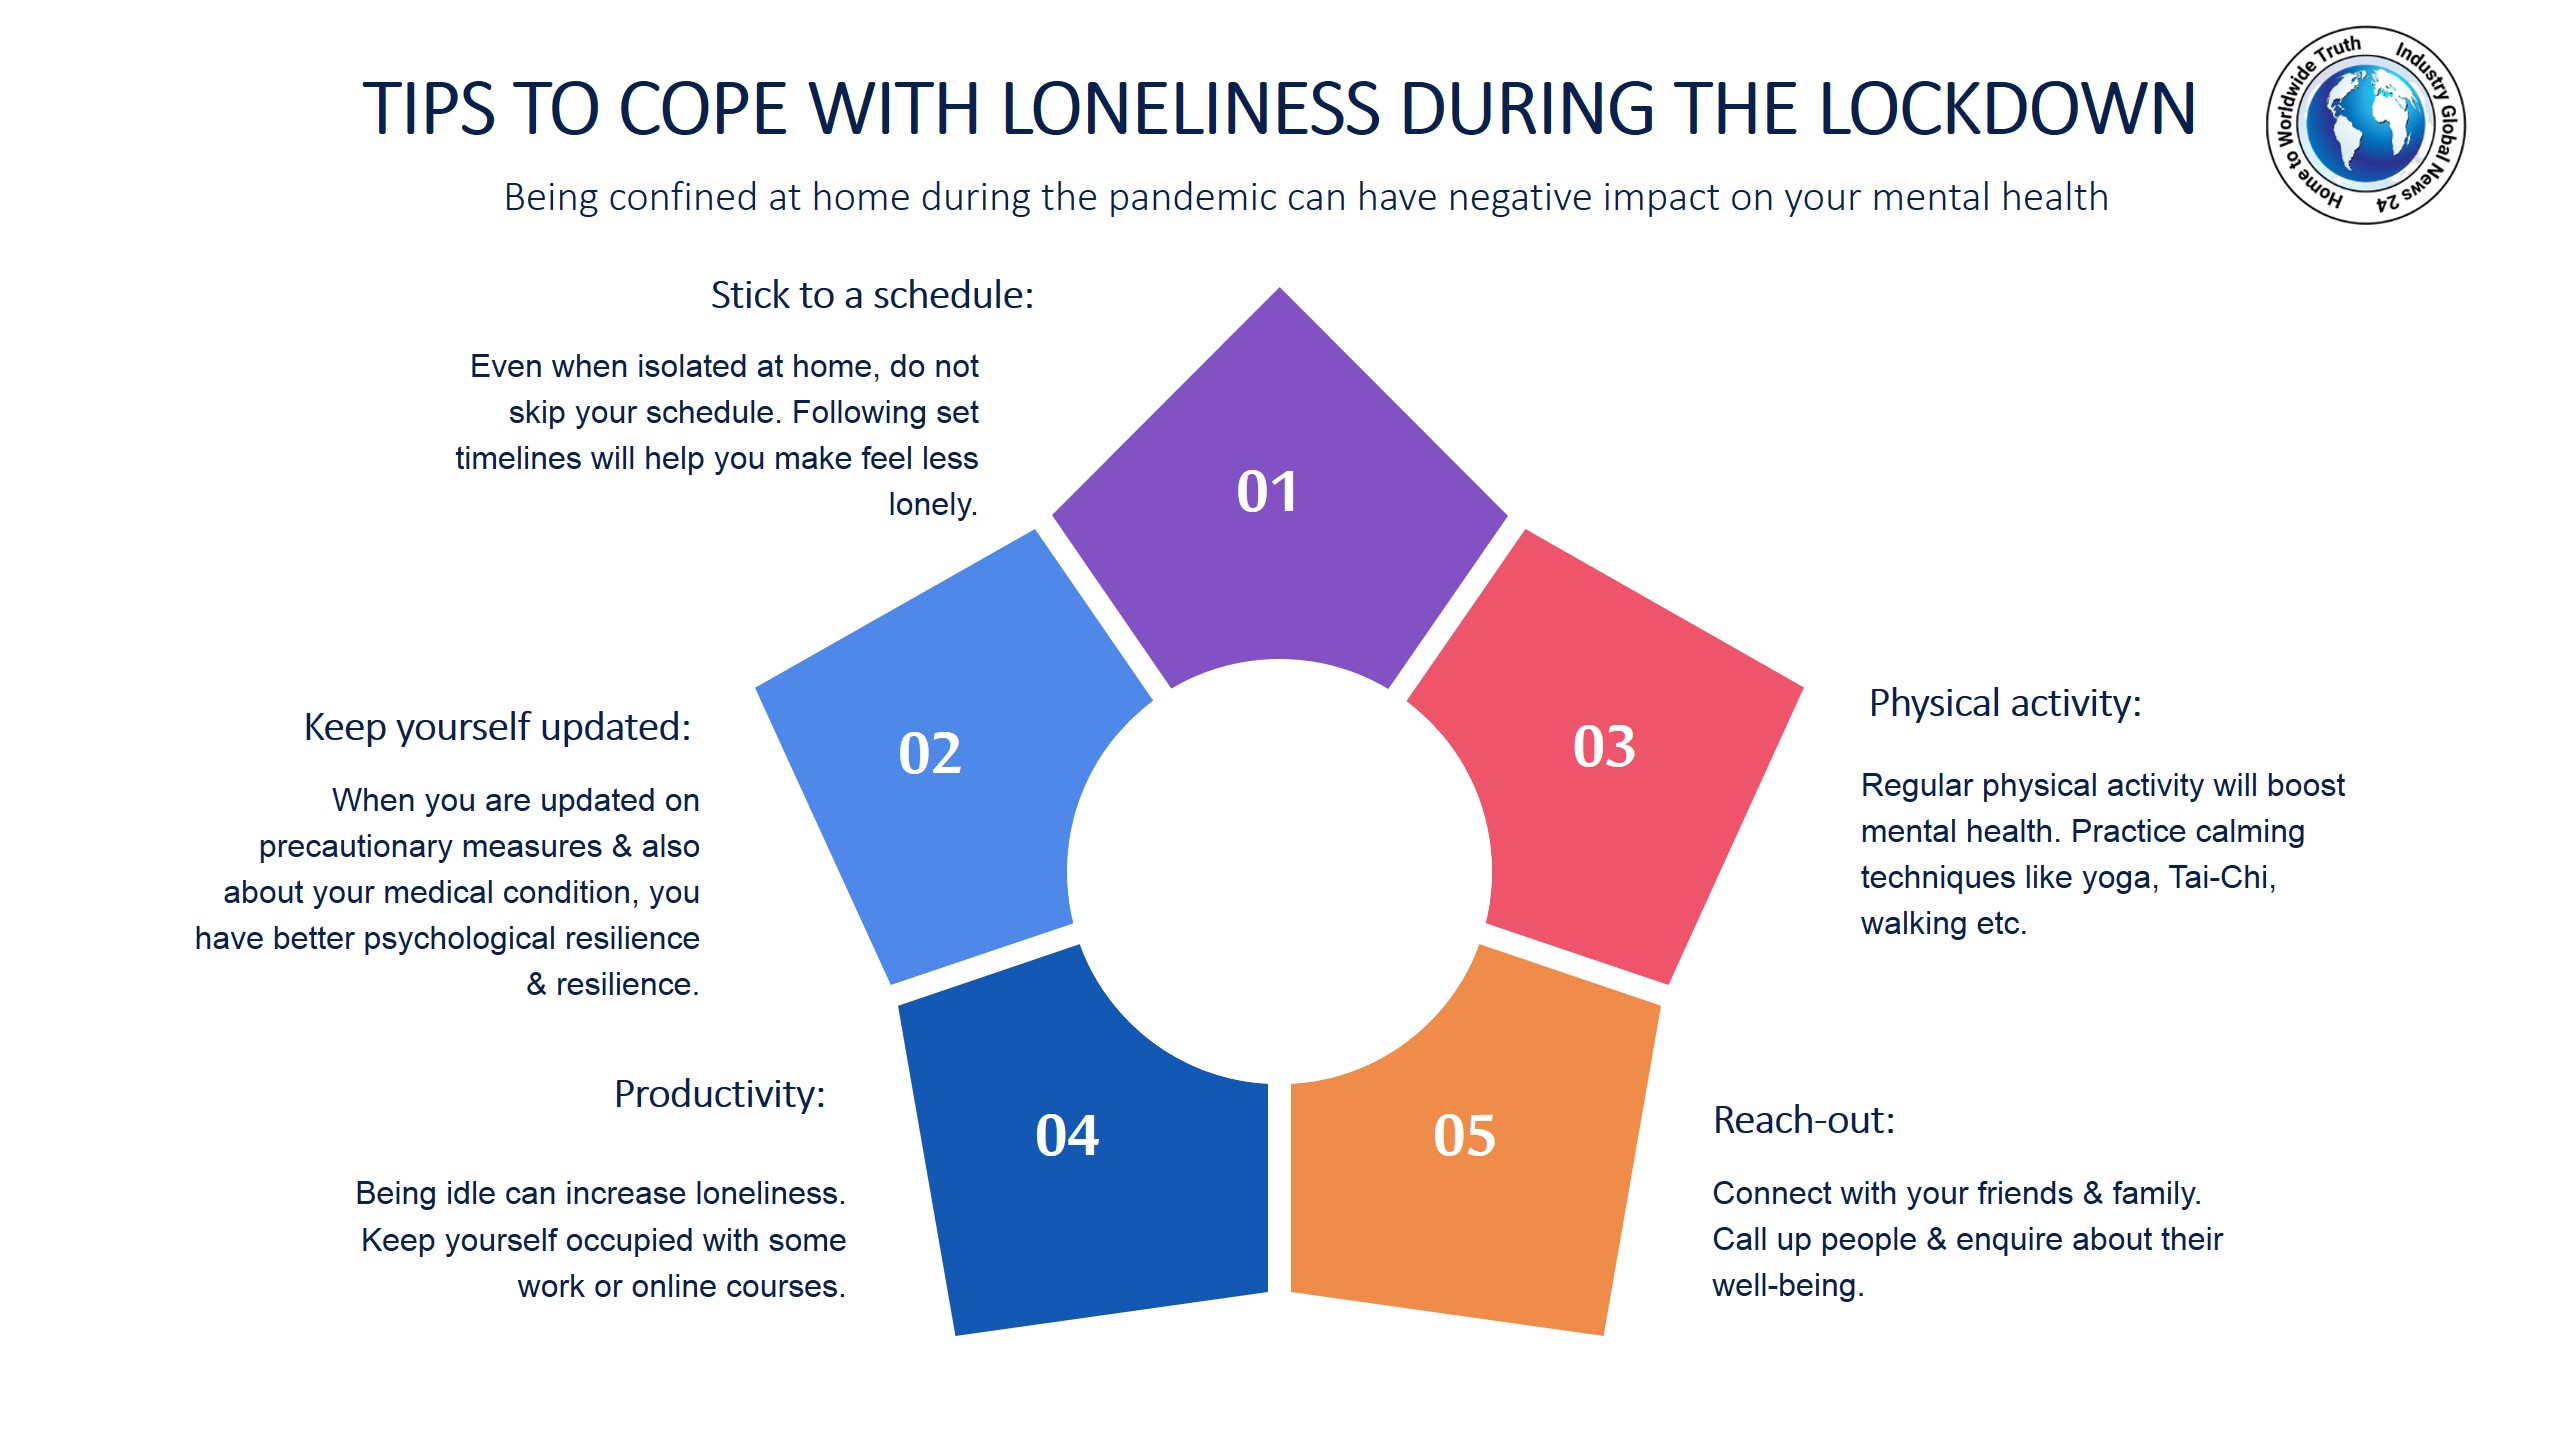 Tips to cope with loneliness during the lockdown